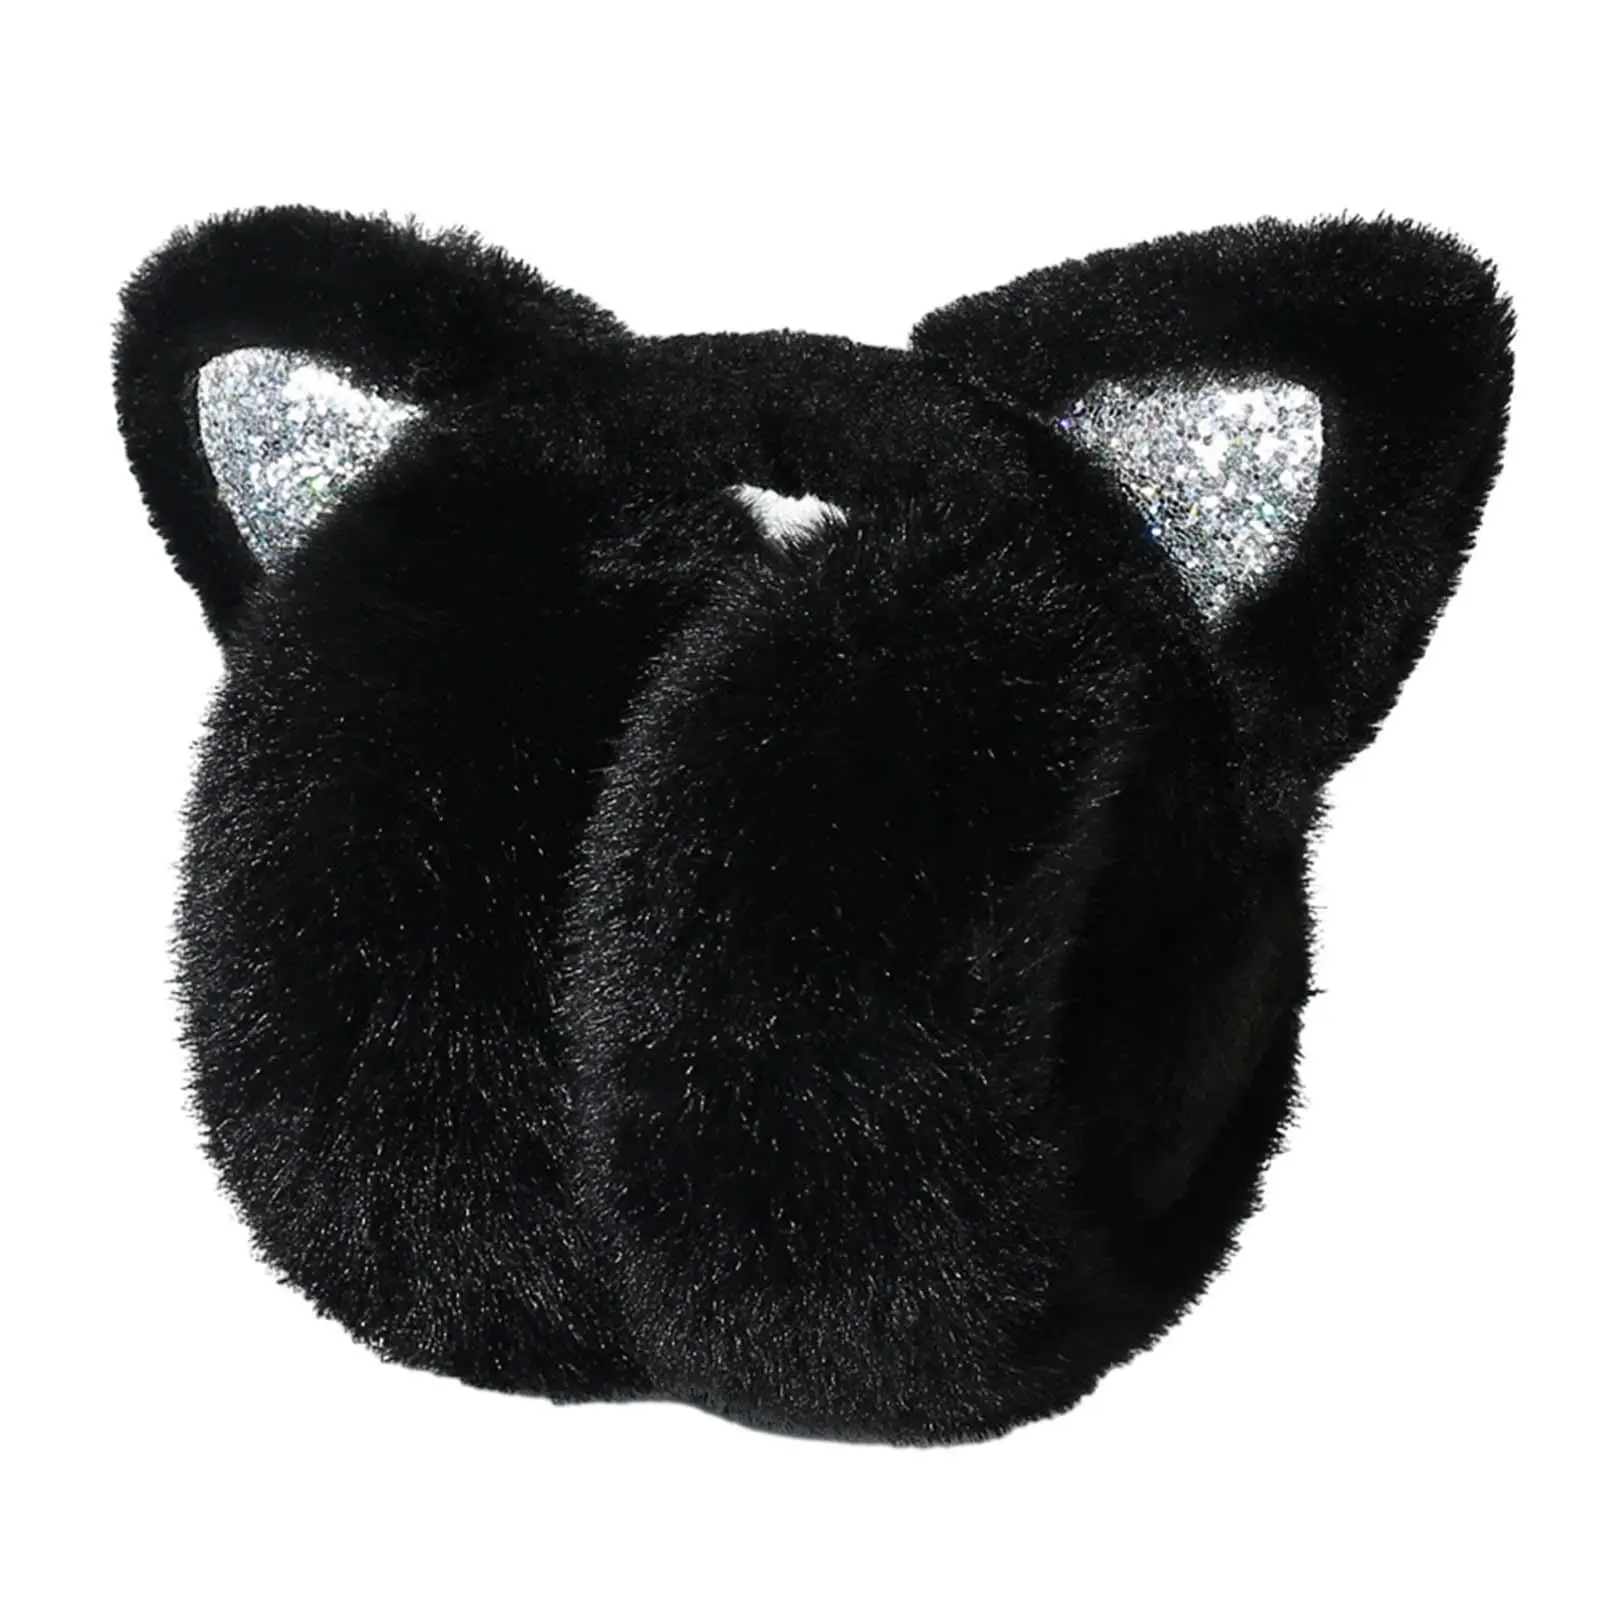 Winter Ear Muffs Ear Warmers Foldable Women Premium Earmuffs Ear Cover for Traveling Skating Skiing Cycling Outdoor